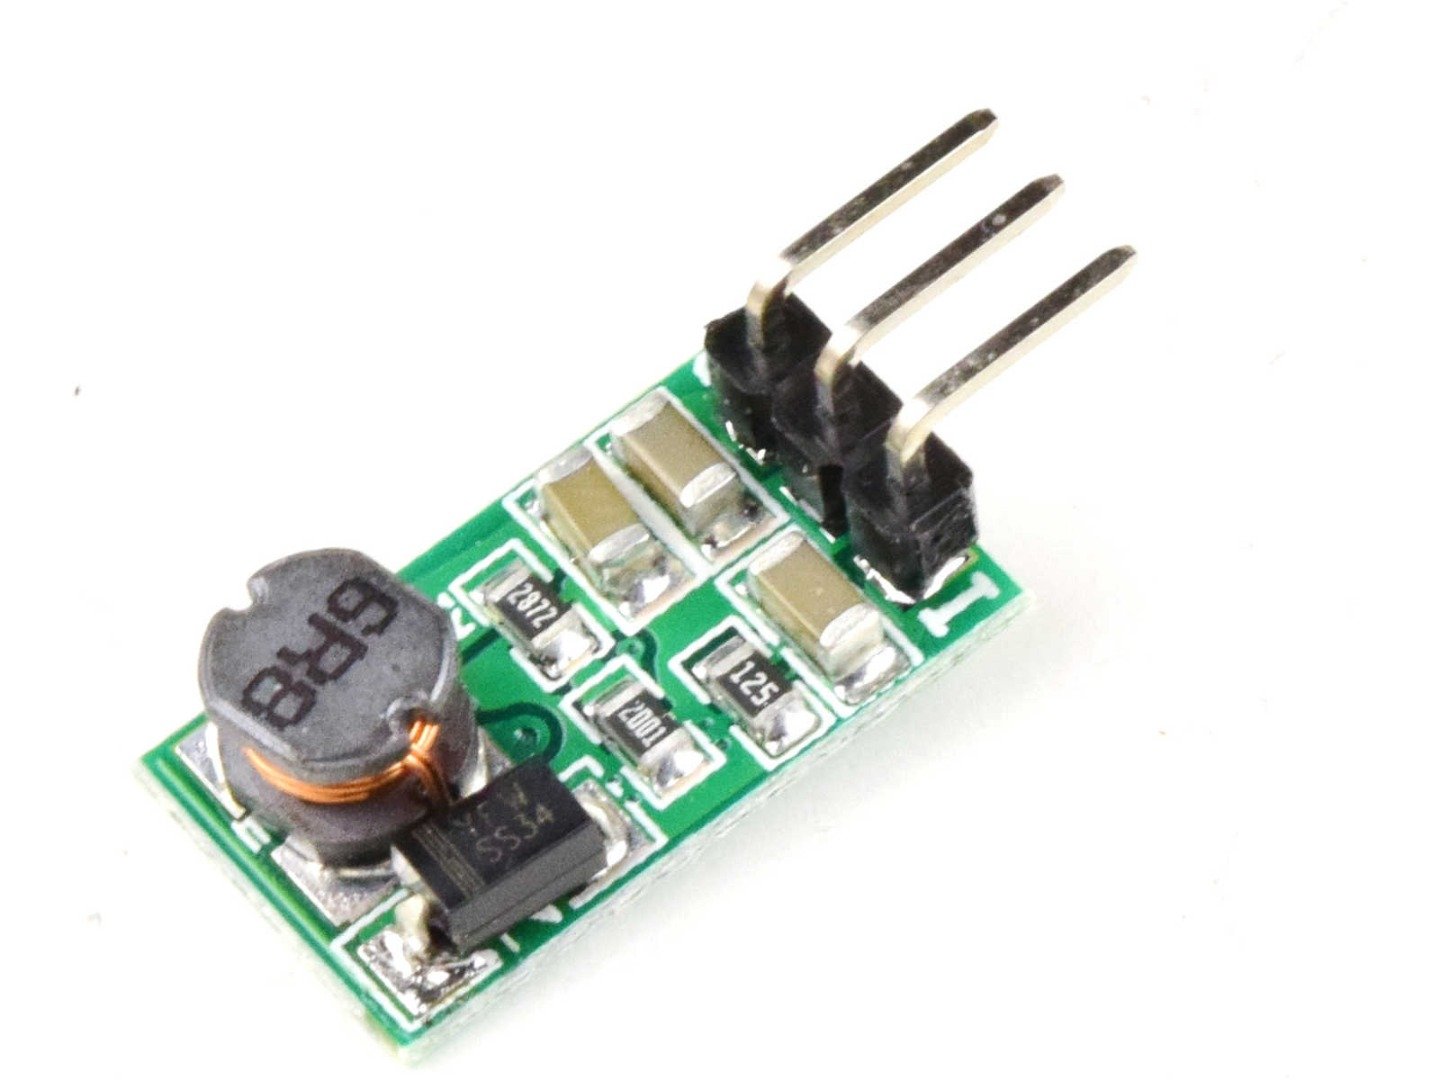 DC-DC Switching Regulator 5V 1A – TO-220 pinout – 7805 Replacement 8